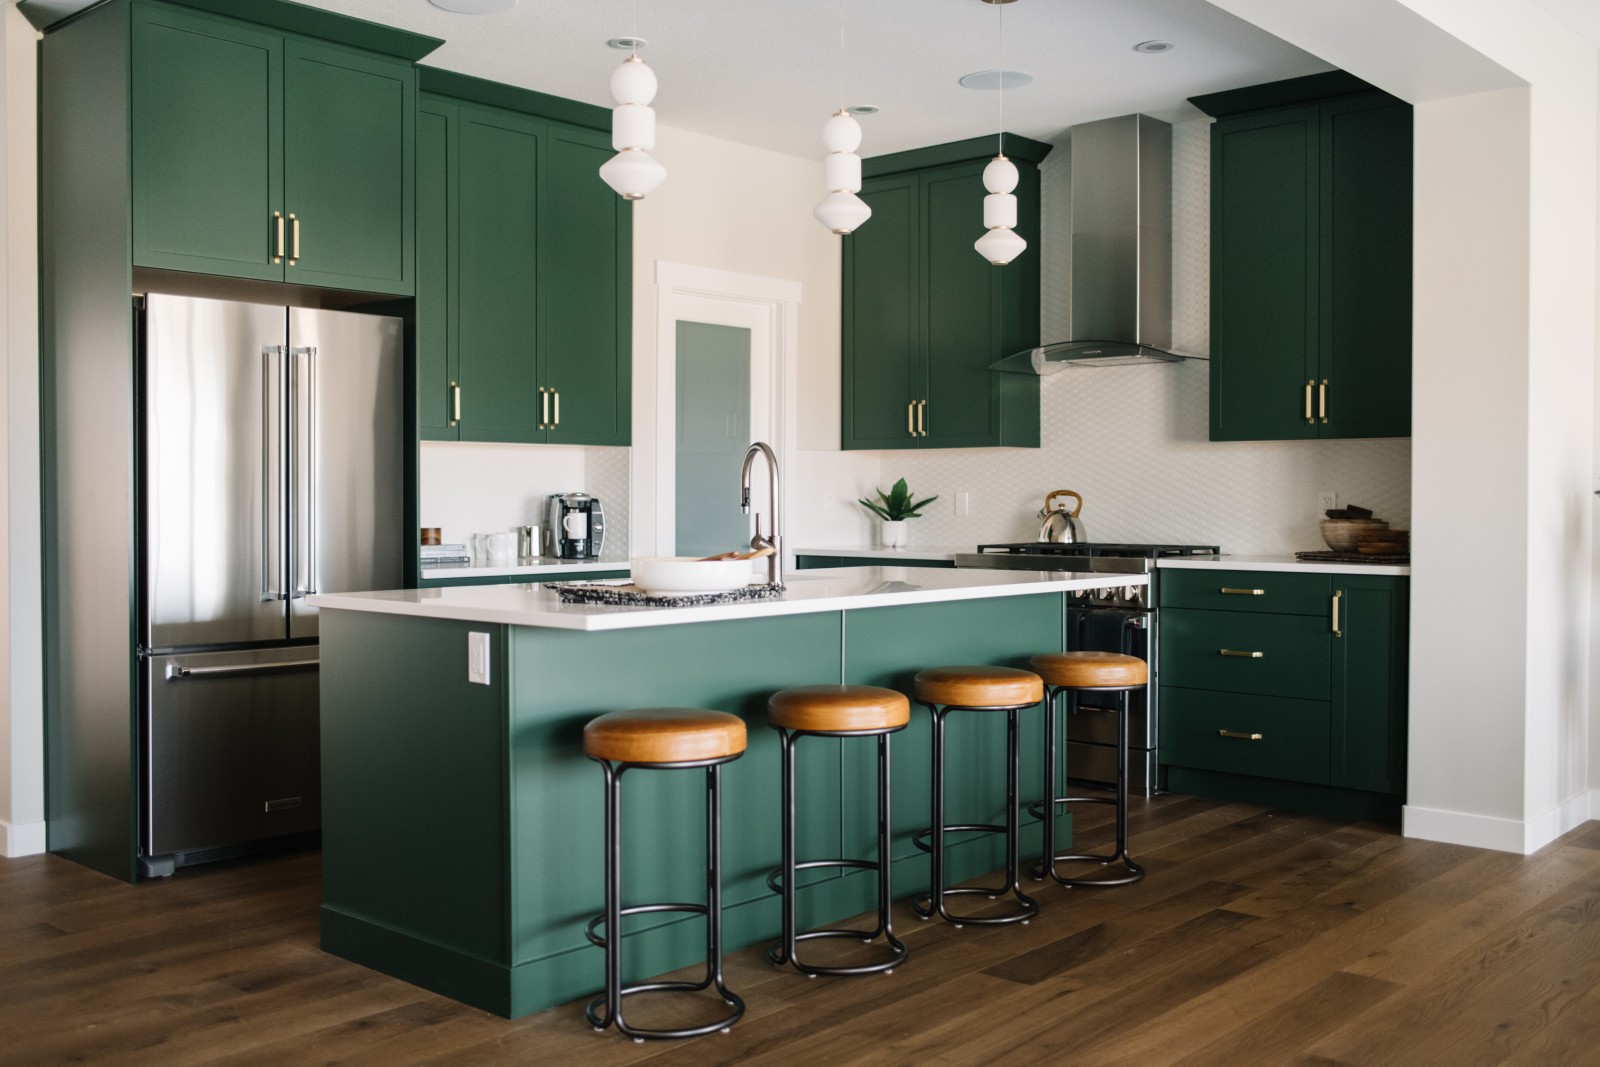 An overall picture of the green kitchen cabinets in the Bianca showhome